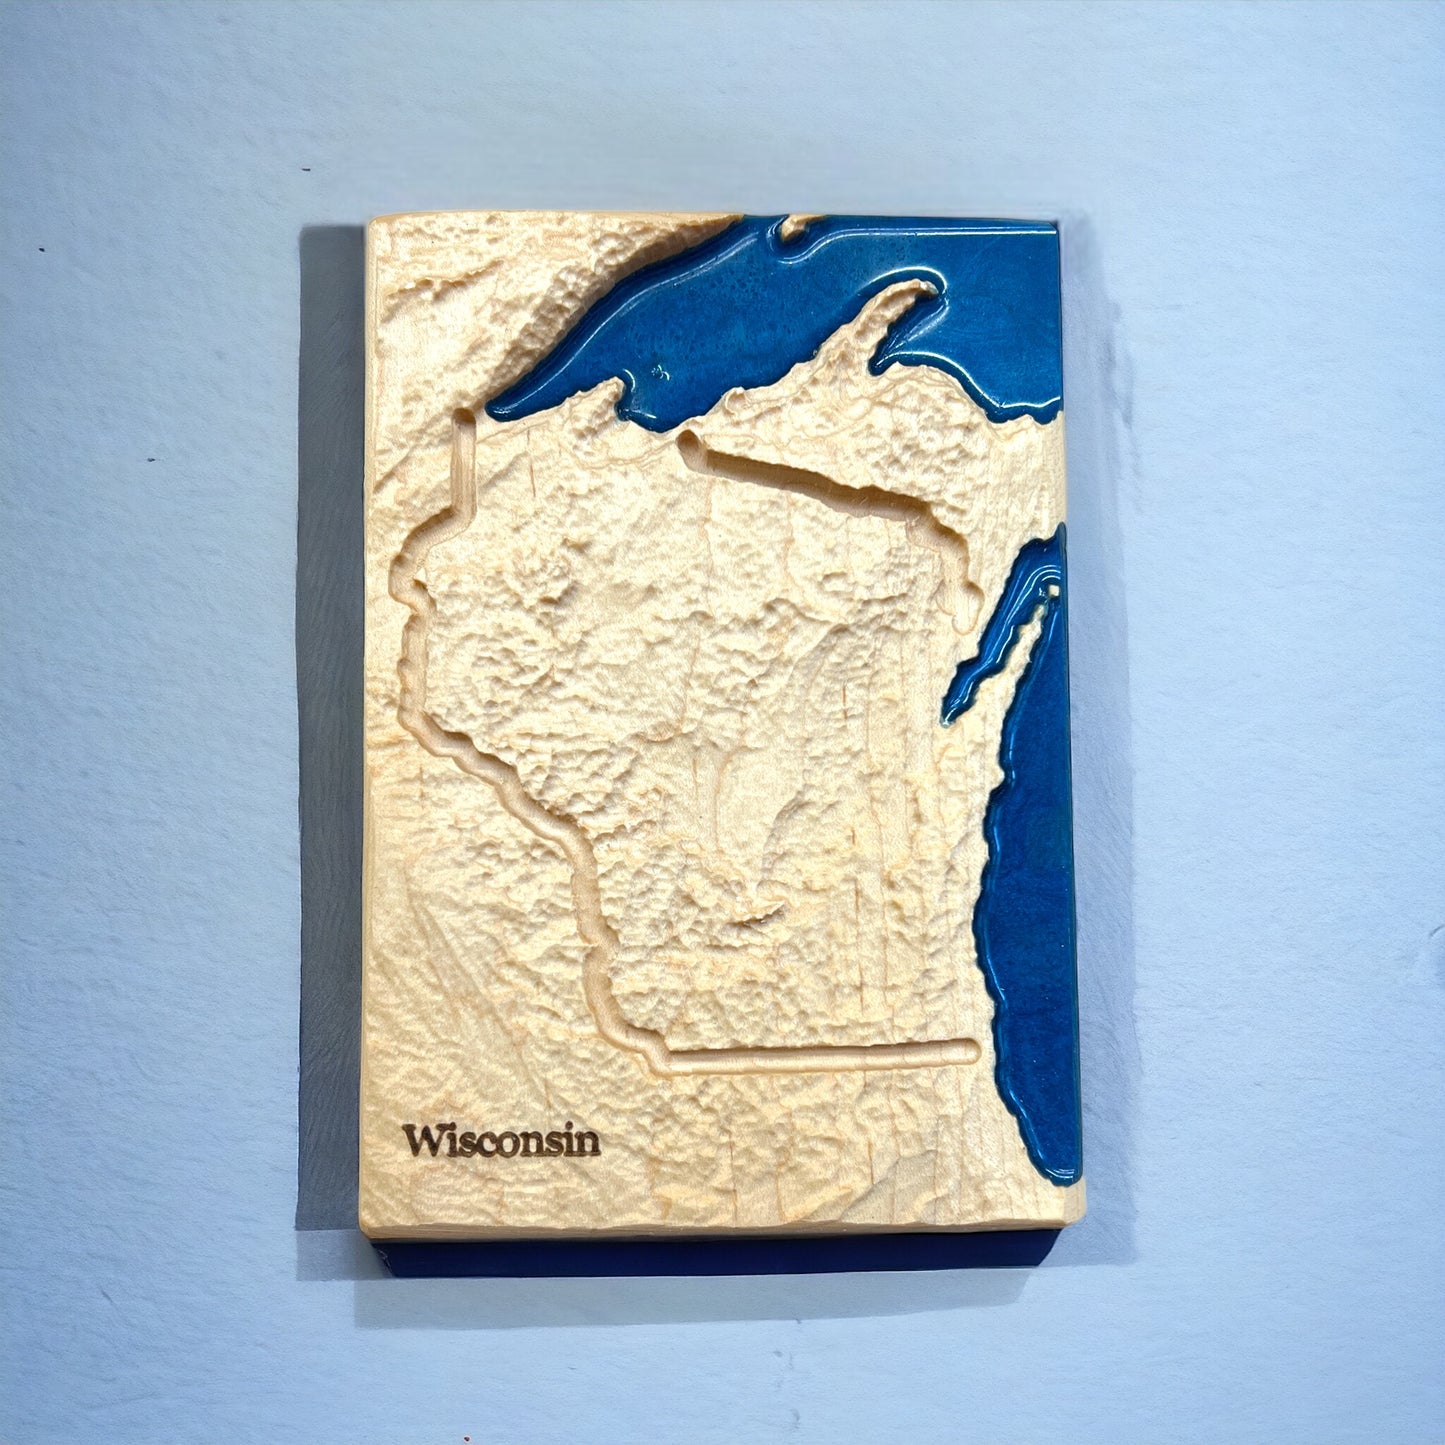 Wisconsin Map | Wisconsin Wood Carved Relief Map | Wisconsin Gift | Wisconsin Art | Wisconsin Home Decor | 3D Topographic Wood Map Wisconsin